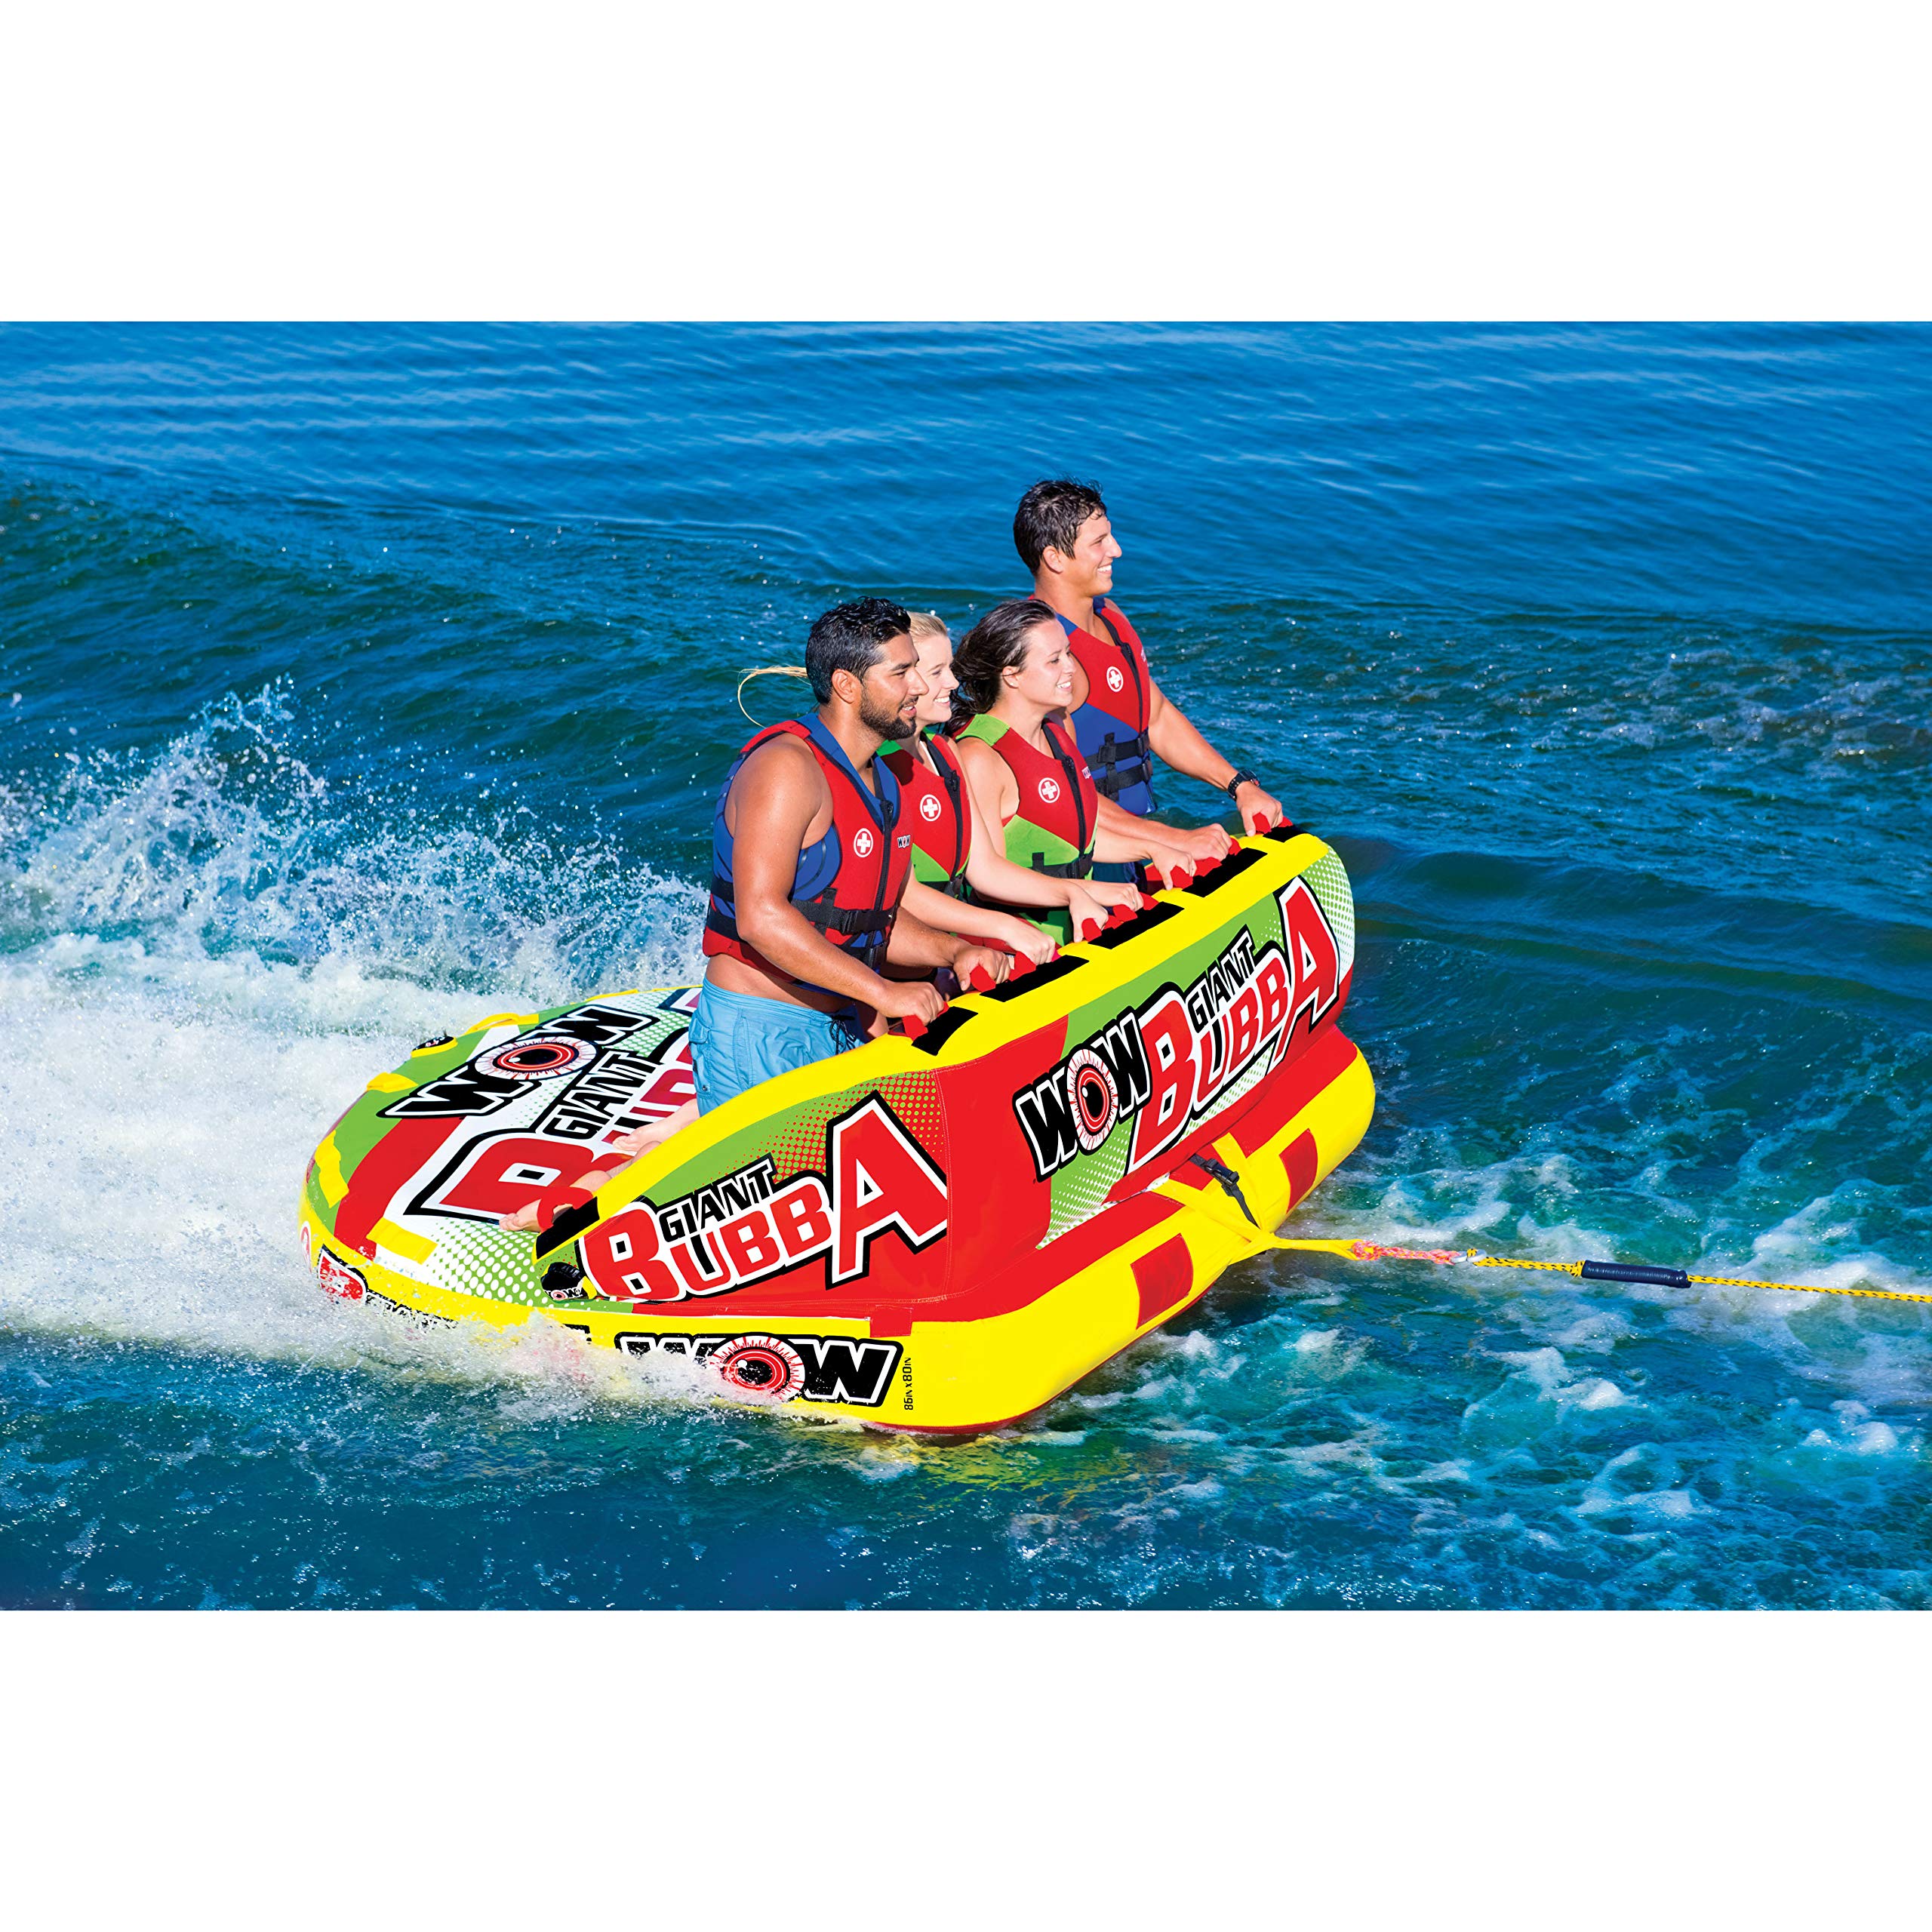 Wow Giant Bubba Towable Tube for Boating 1-4 Persons